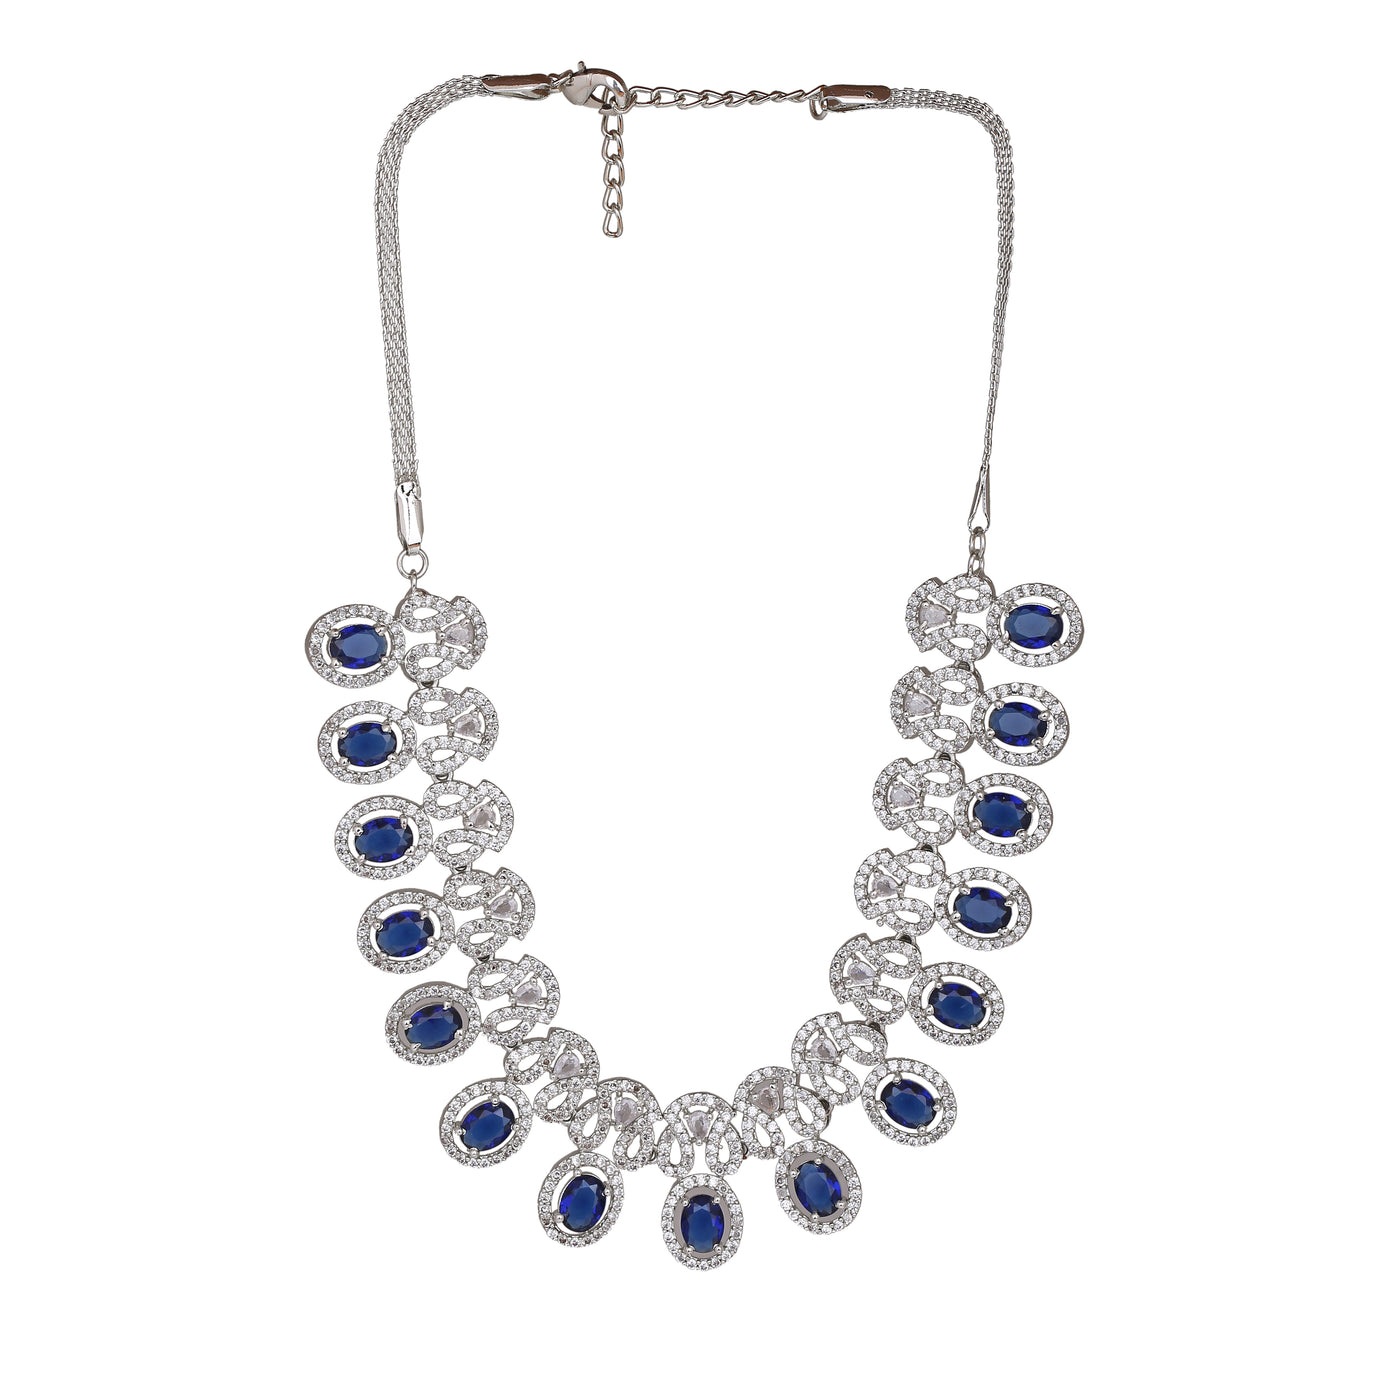 Estele Rhodium Plated CZ Sparkling Necklace Set with Blue Crystals for Women